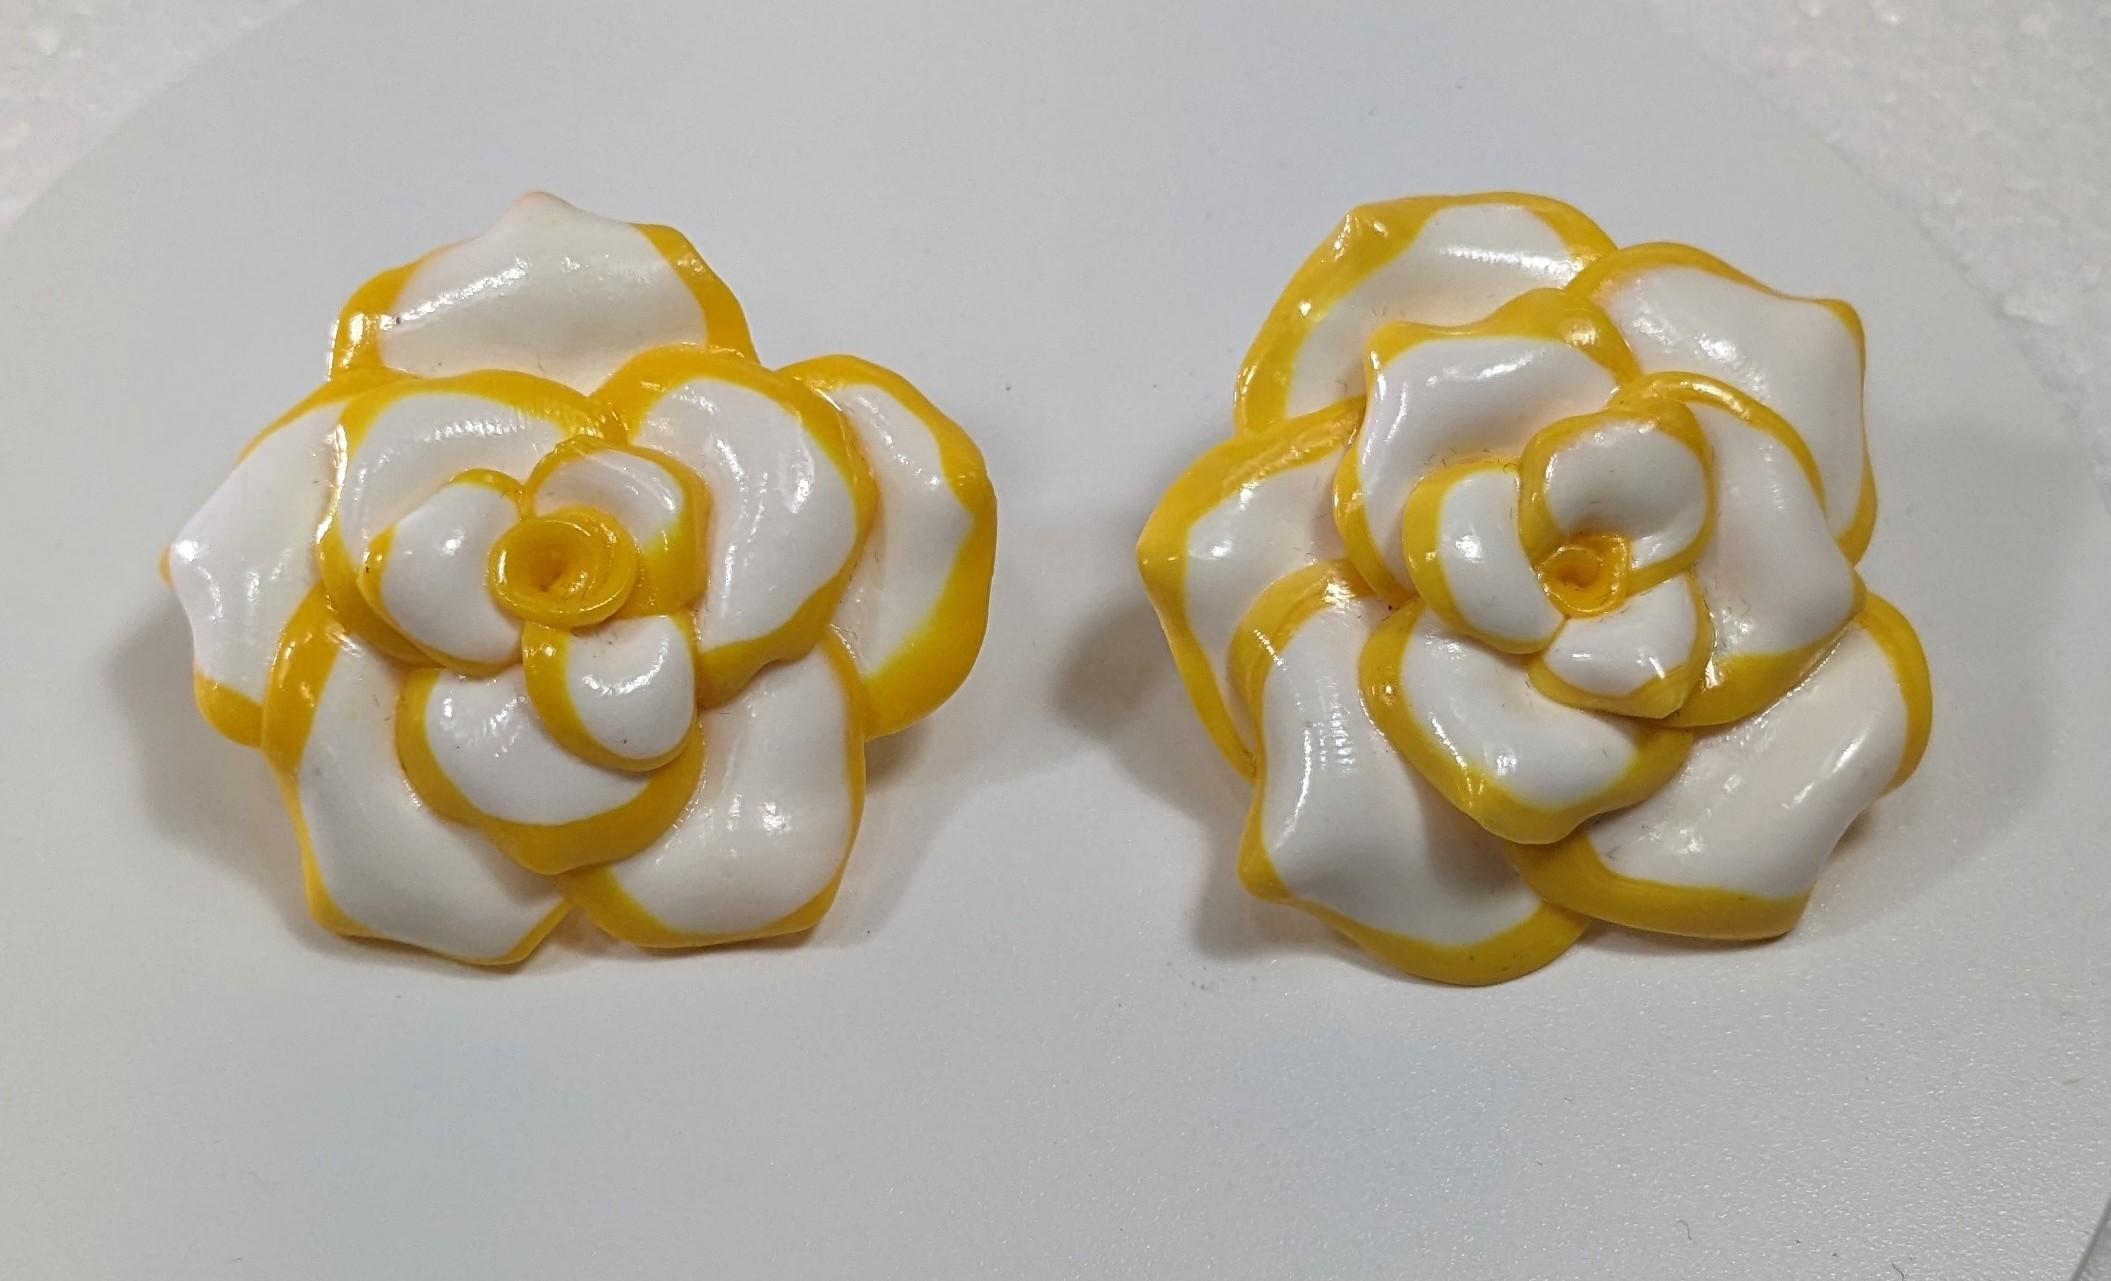 White and Yellow Camelia Polymer  Clay Earrings with golplated silver closure

Diameter: 5 cm
Weight: 16 grams
Color  White and Yellow
Handmade




Pradera Fashion Division  is specialized in European Fashion designers, clothing, handbags,